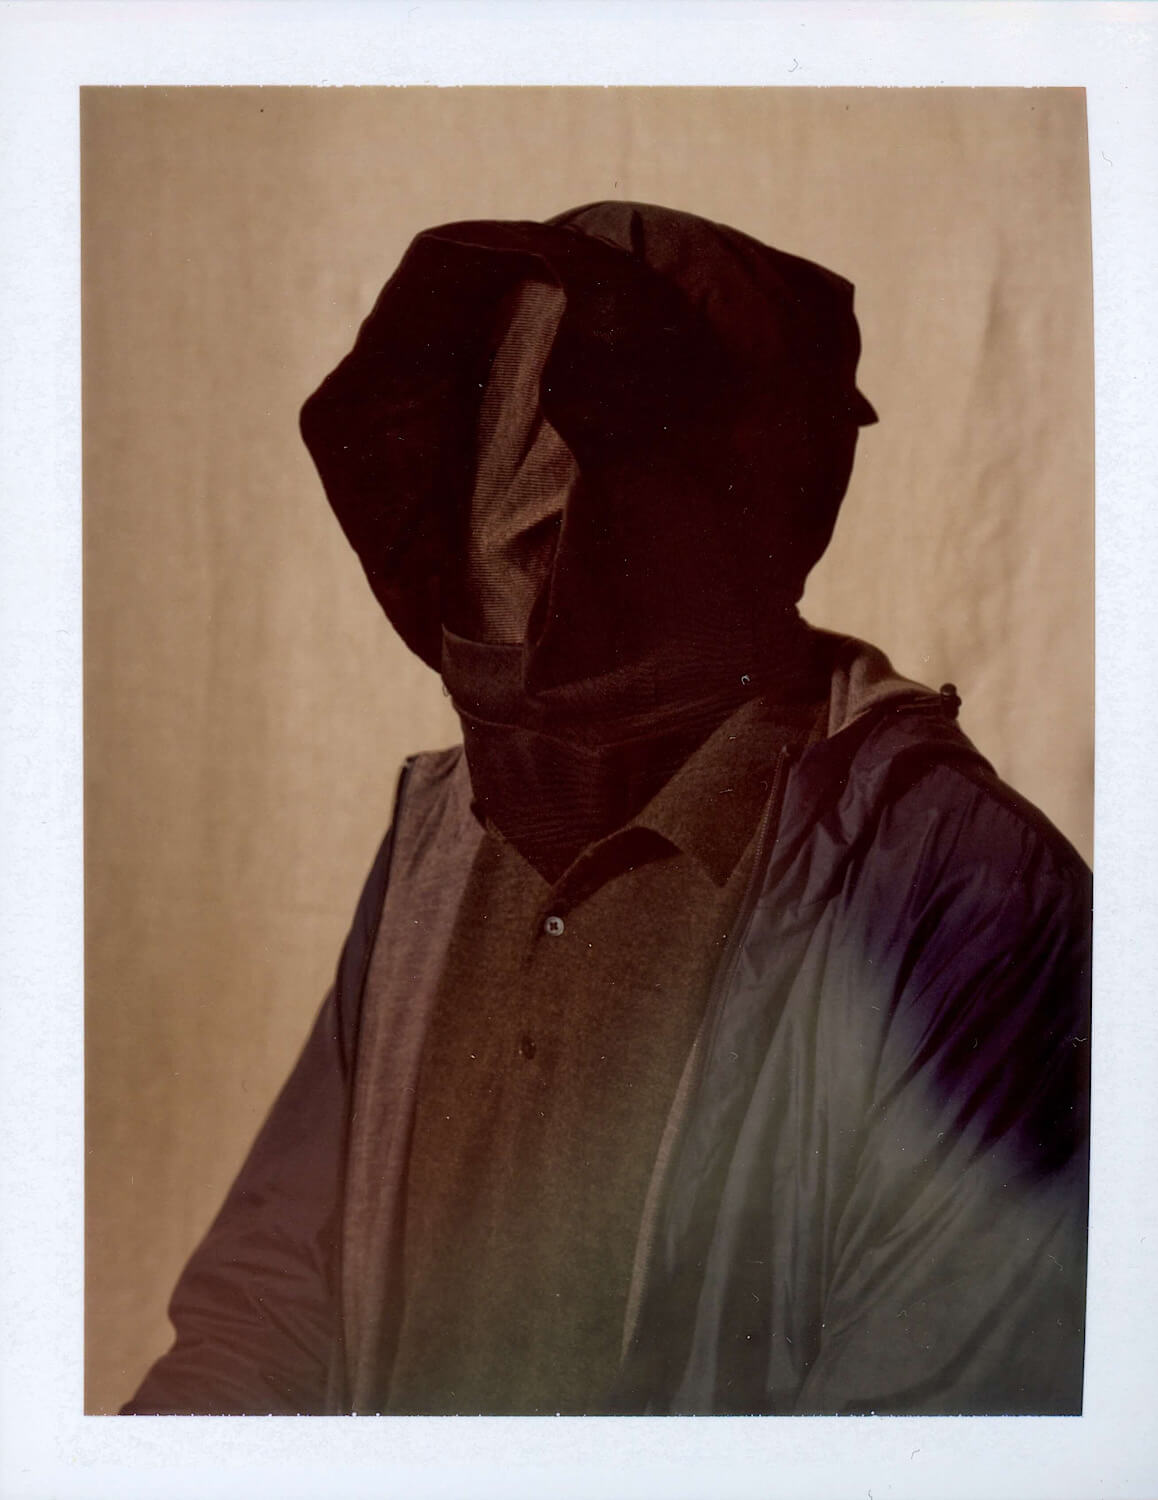 Portrait - Unidentified Black Male, or 8 out of 10 frames… Creating a small body of personal portraiture on Fuji FP-100c instant film with a Graflex Crown Graphic